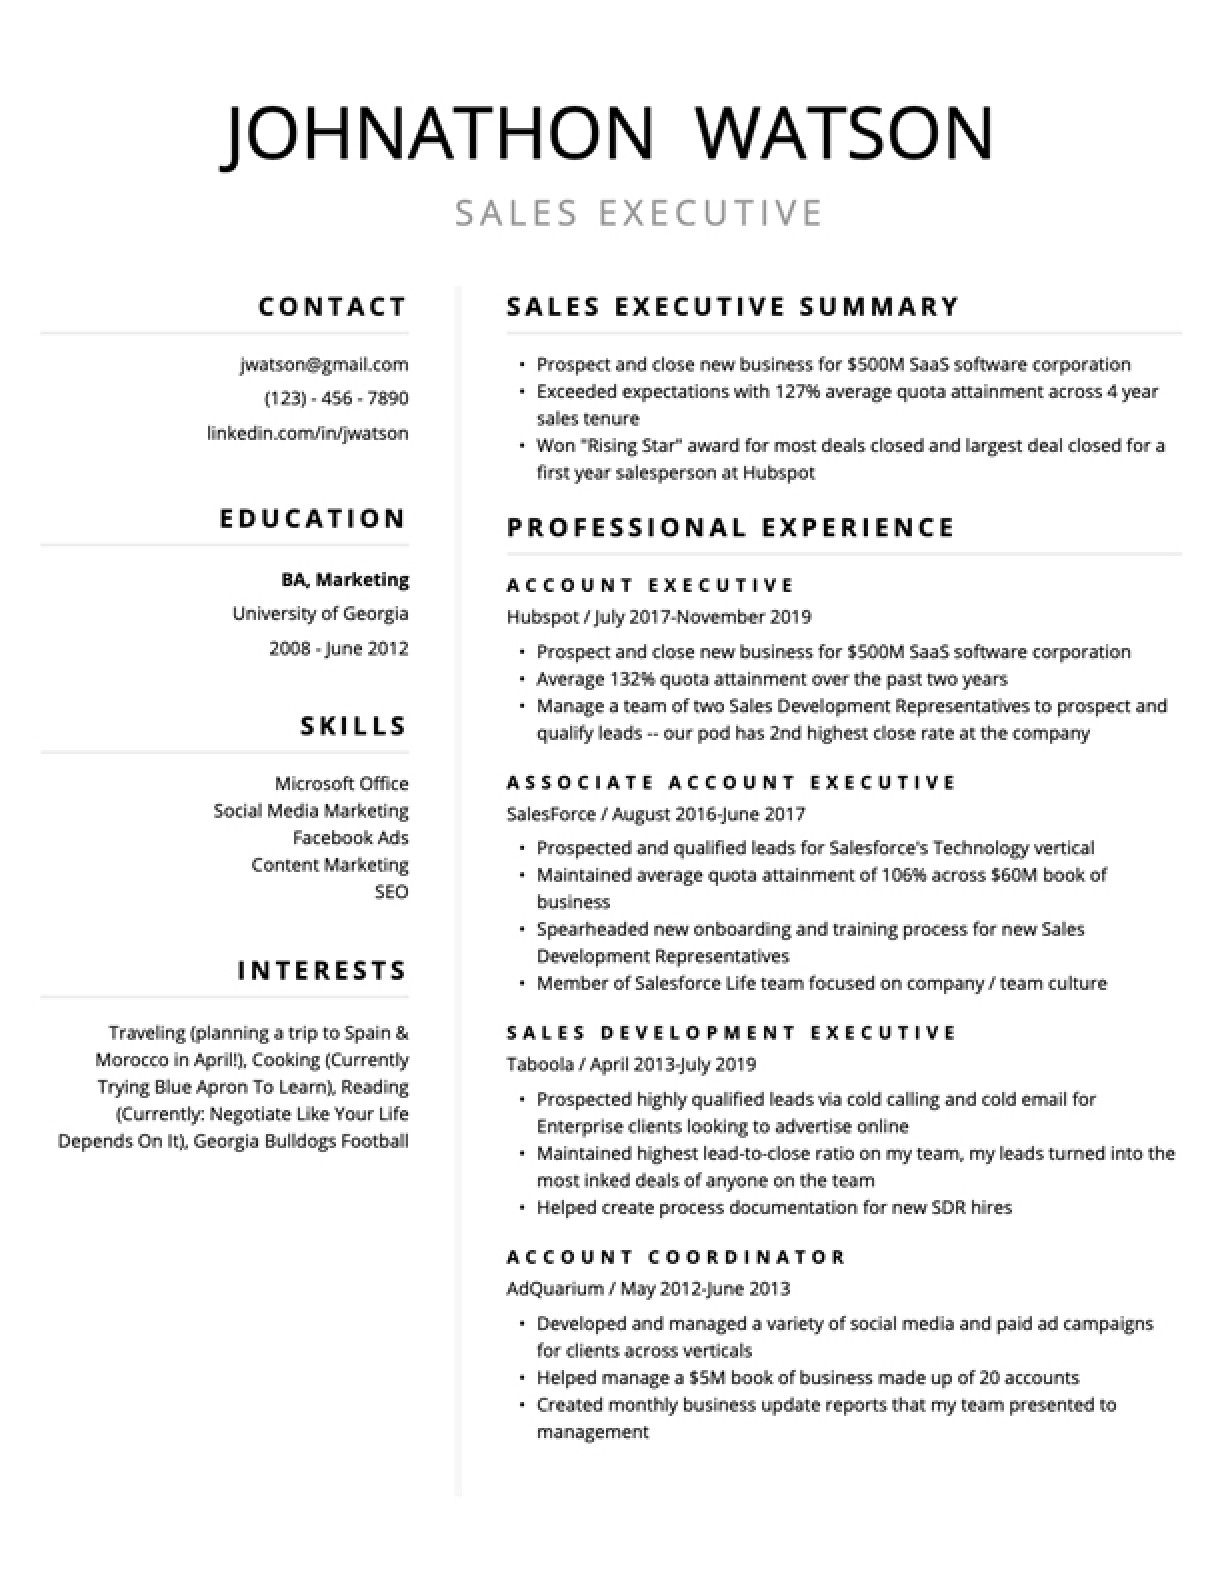 Sample Resume for Business Process associate Free Resume Templates for 2022 (edit & Download) Resybuild.io